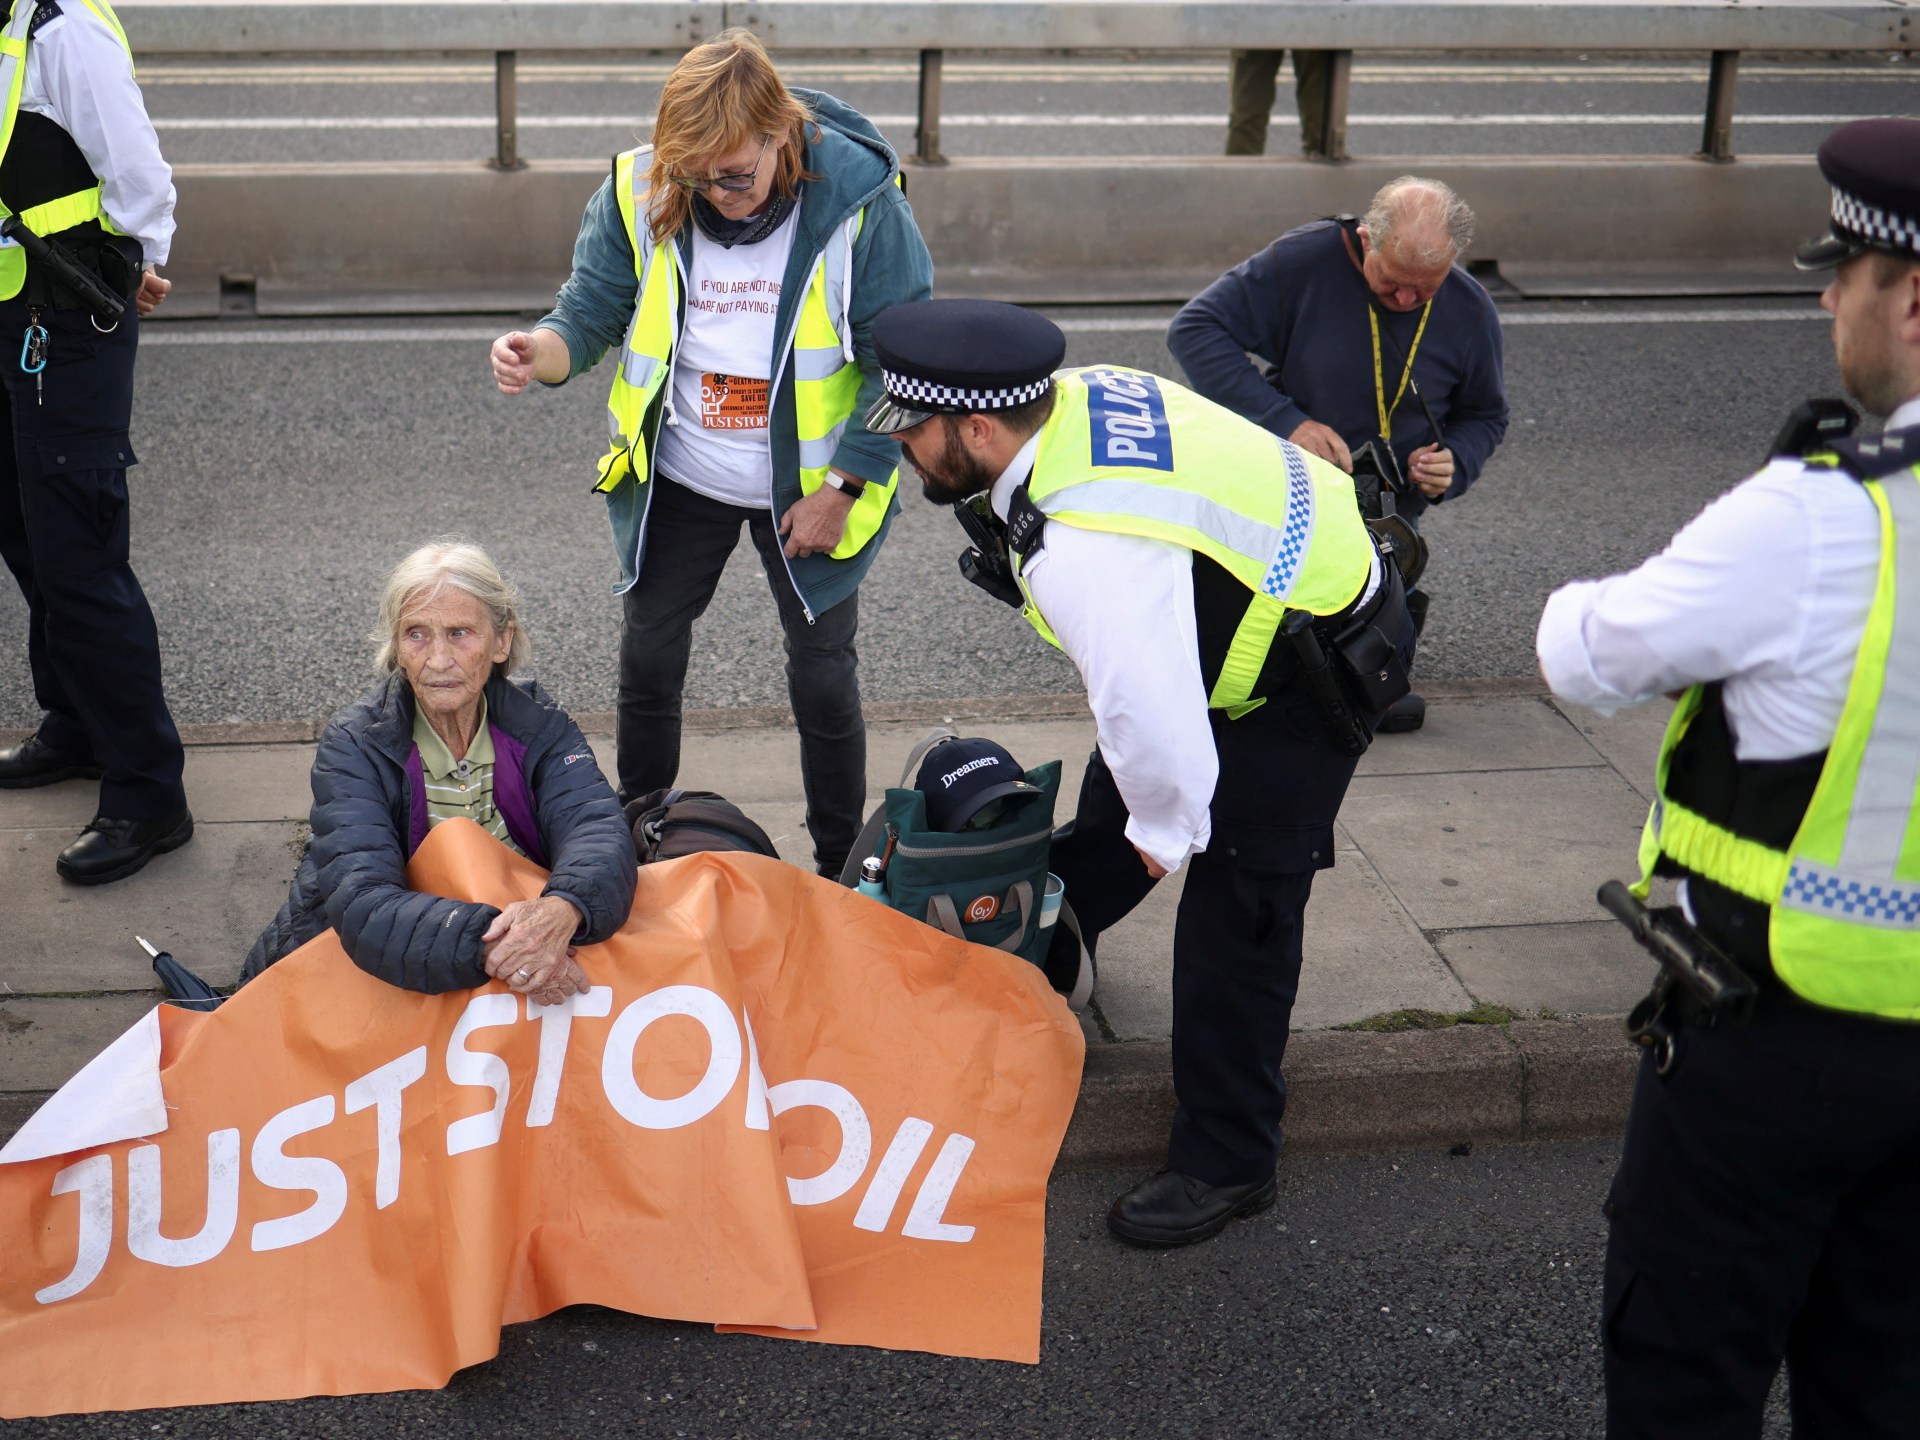 UN expert warns of ‘severe’ crackdown on climate protestors in UK | Environment News